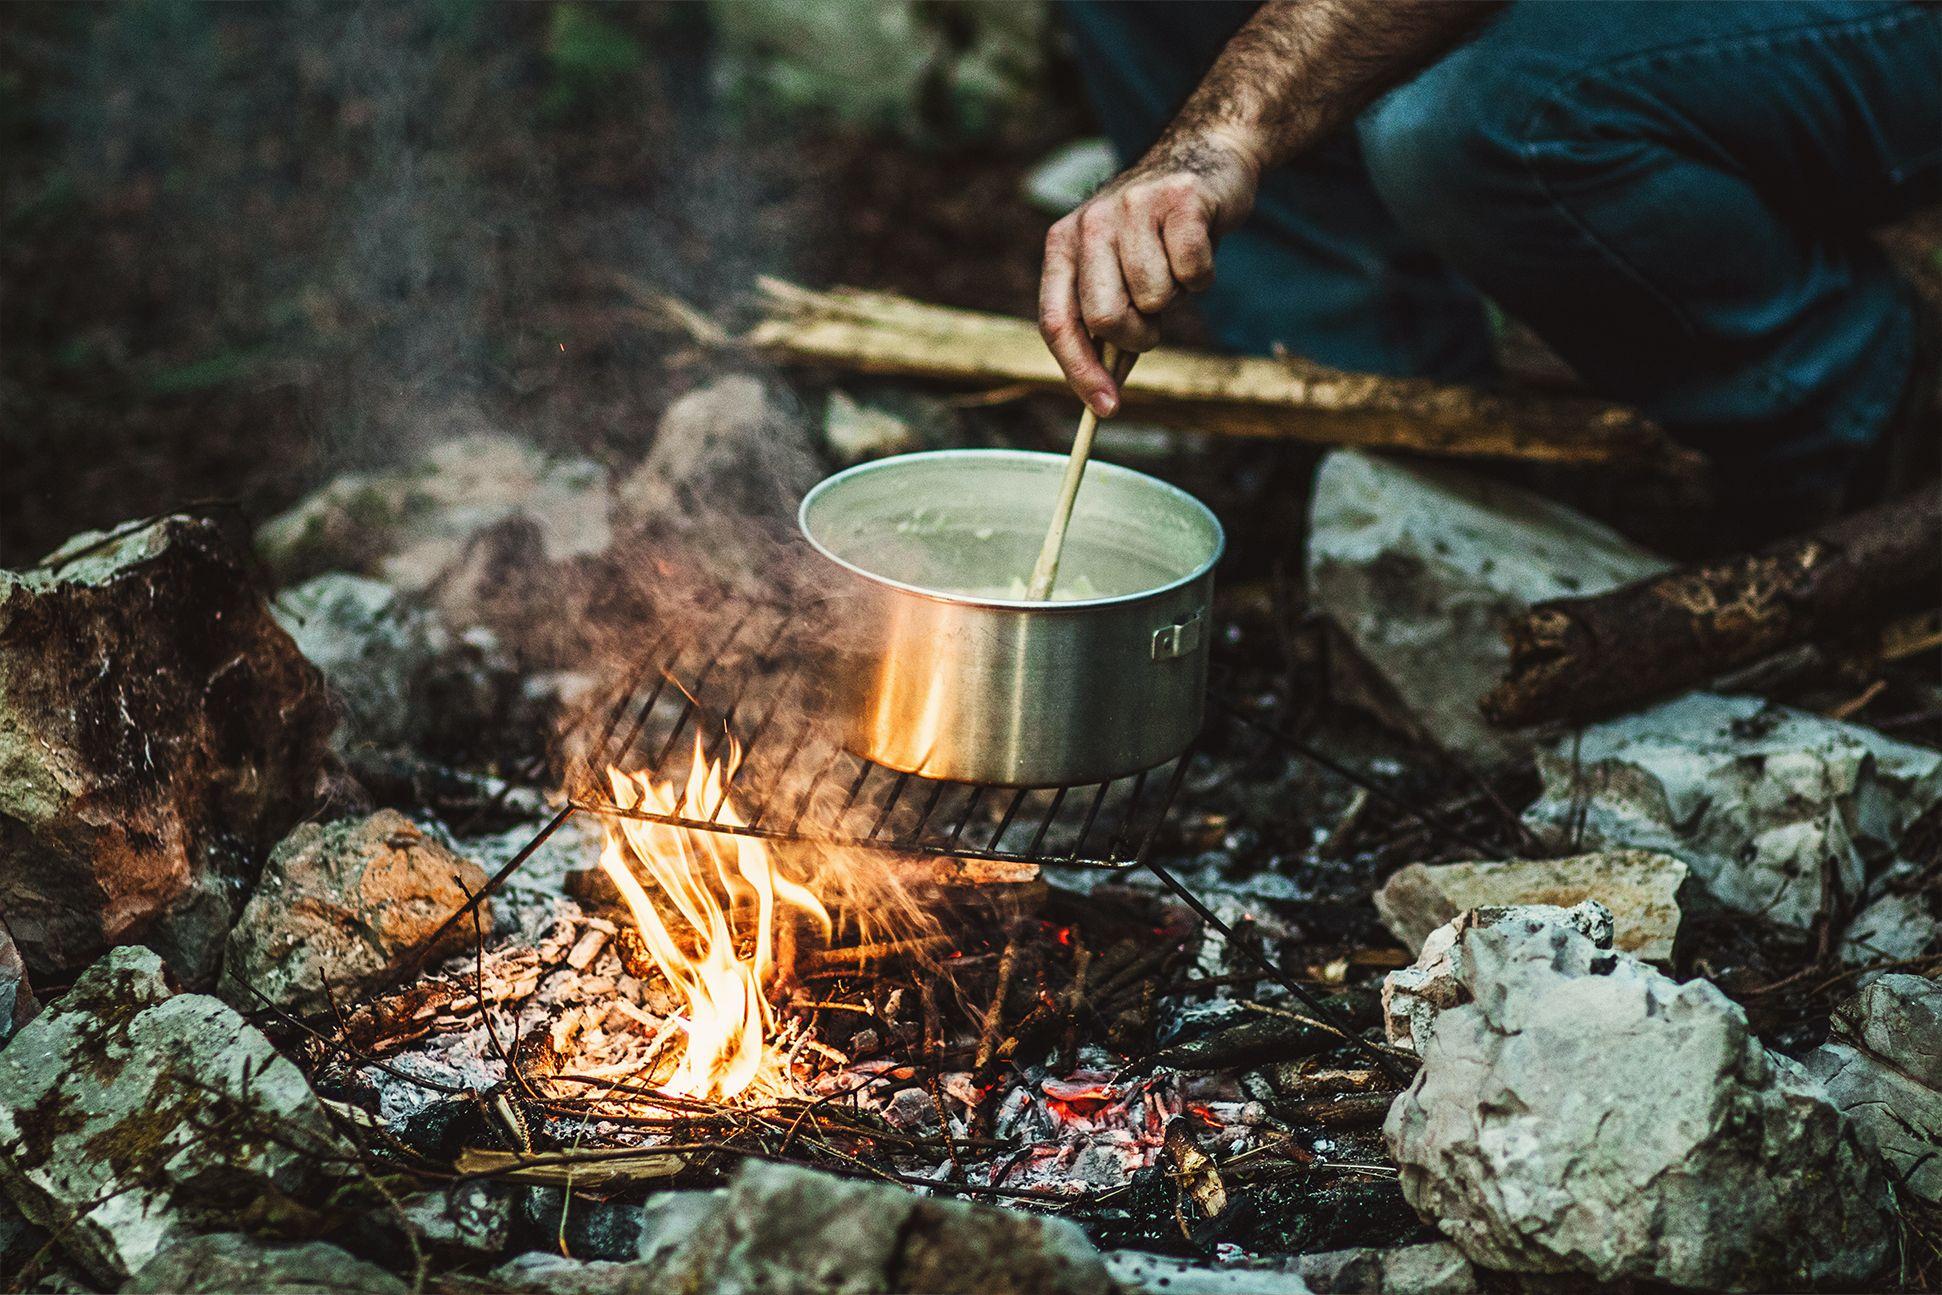 Cooking Cheese fondue on the campfire 